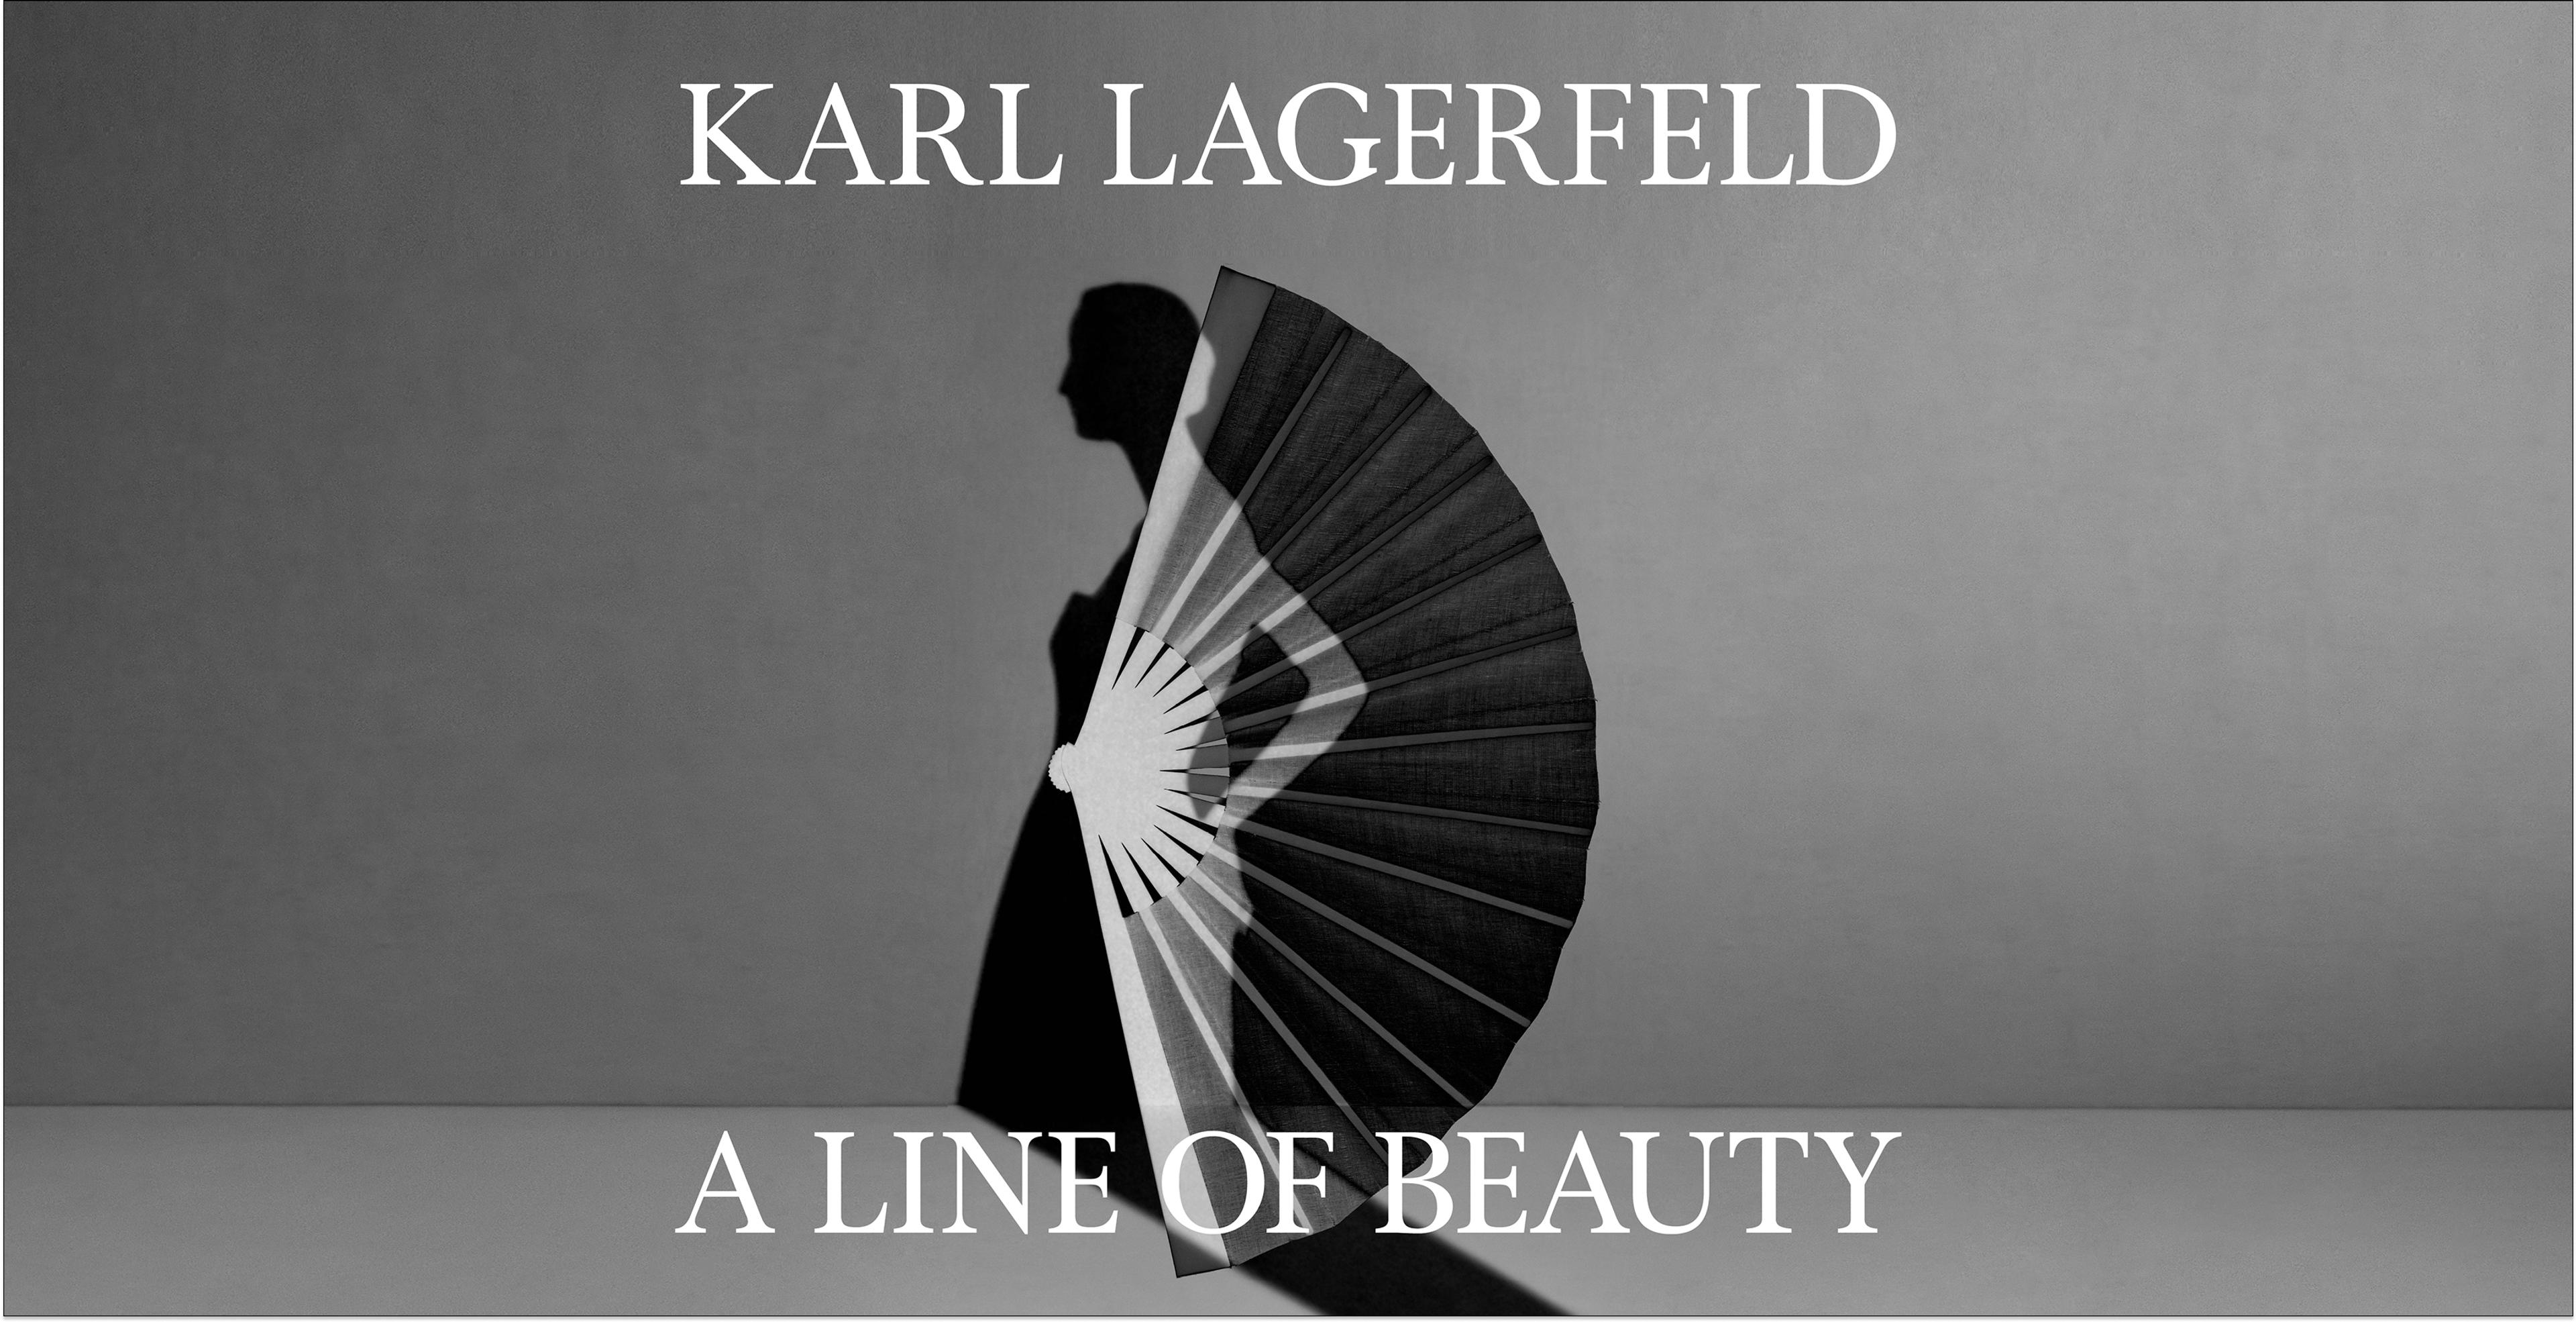 An open fan with a female silhouette in front of the shadow of a woman and white text that reads Karl Lagerfeld A Line of Beauty